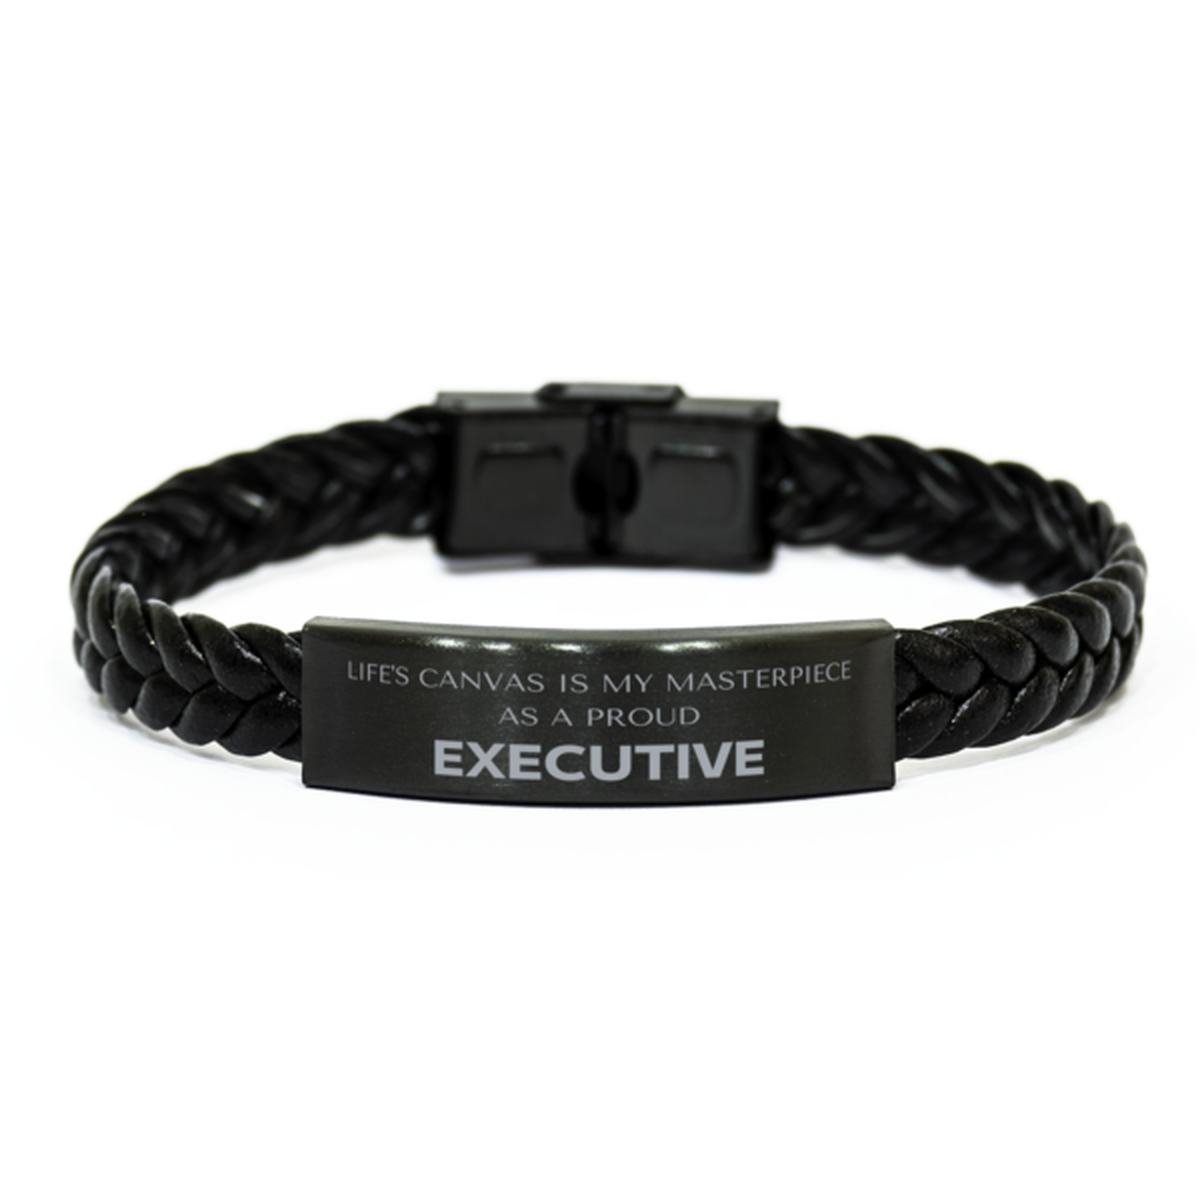 Proud Executive Gifts, Life's canvas is my masterpiece, Epic Birthday Christmas Unique Braided Leather Bracelet For Executive, Coworkers, Men, Women, Friends